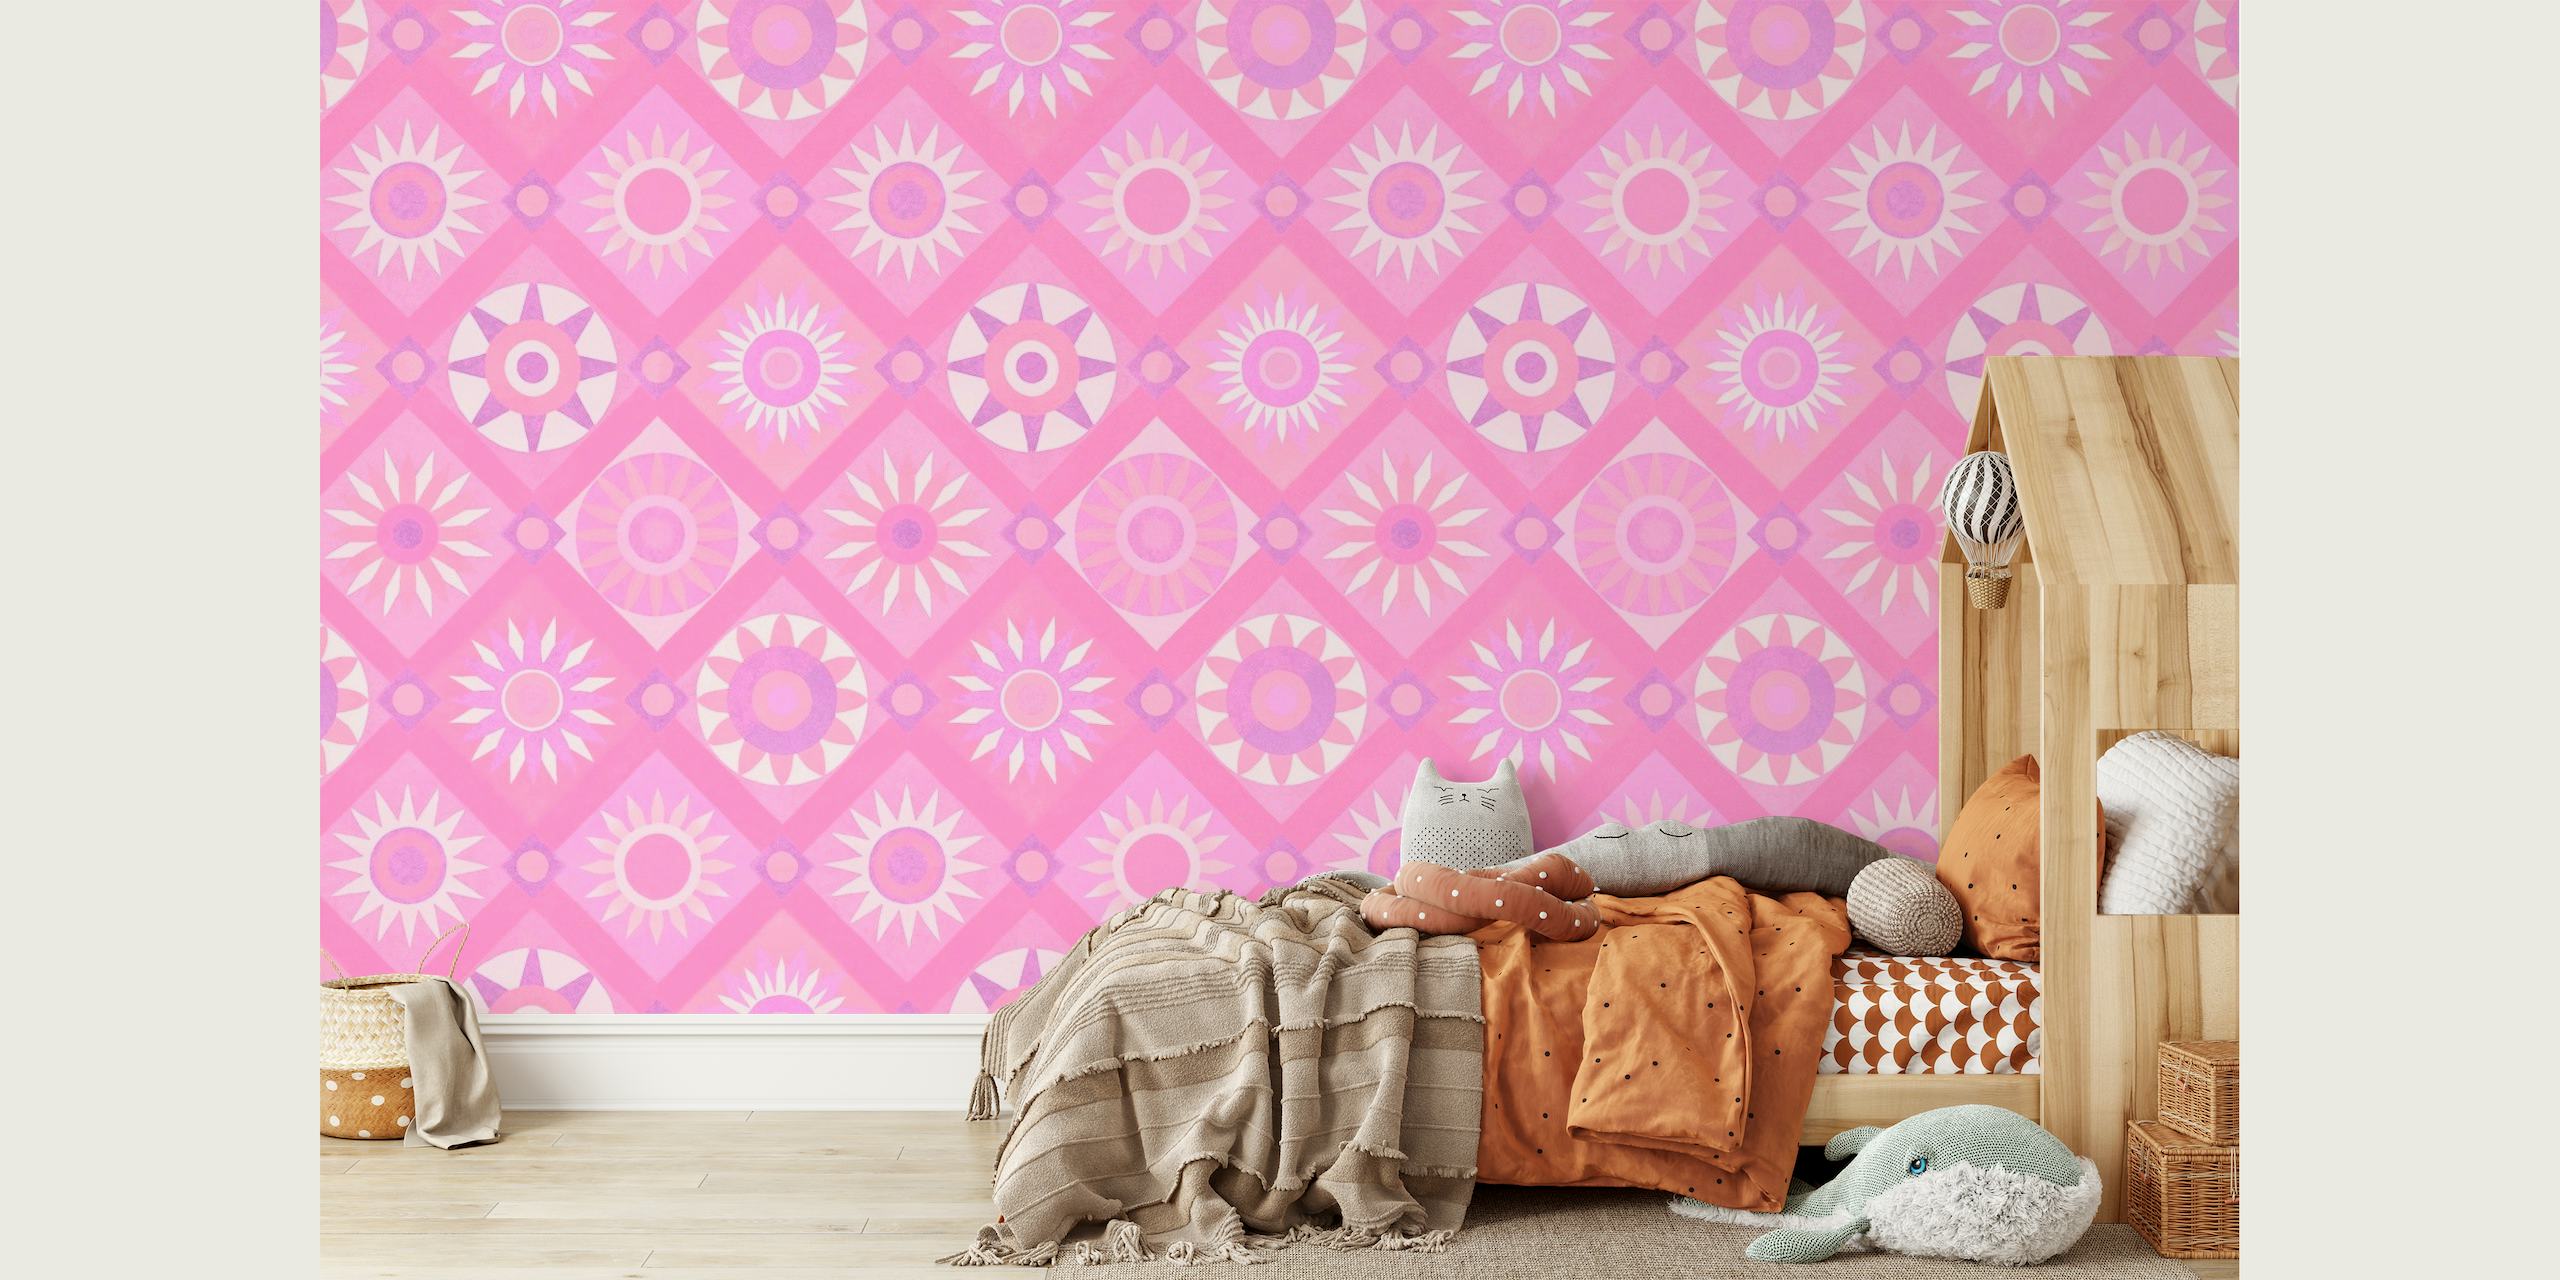 Whimsical Sunshine Quilt Collage Pink wallpaper